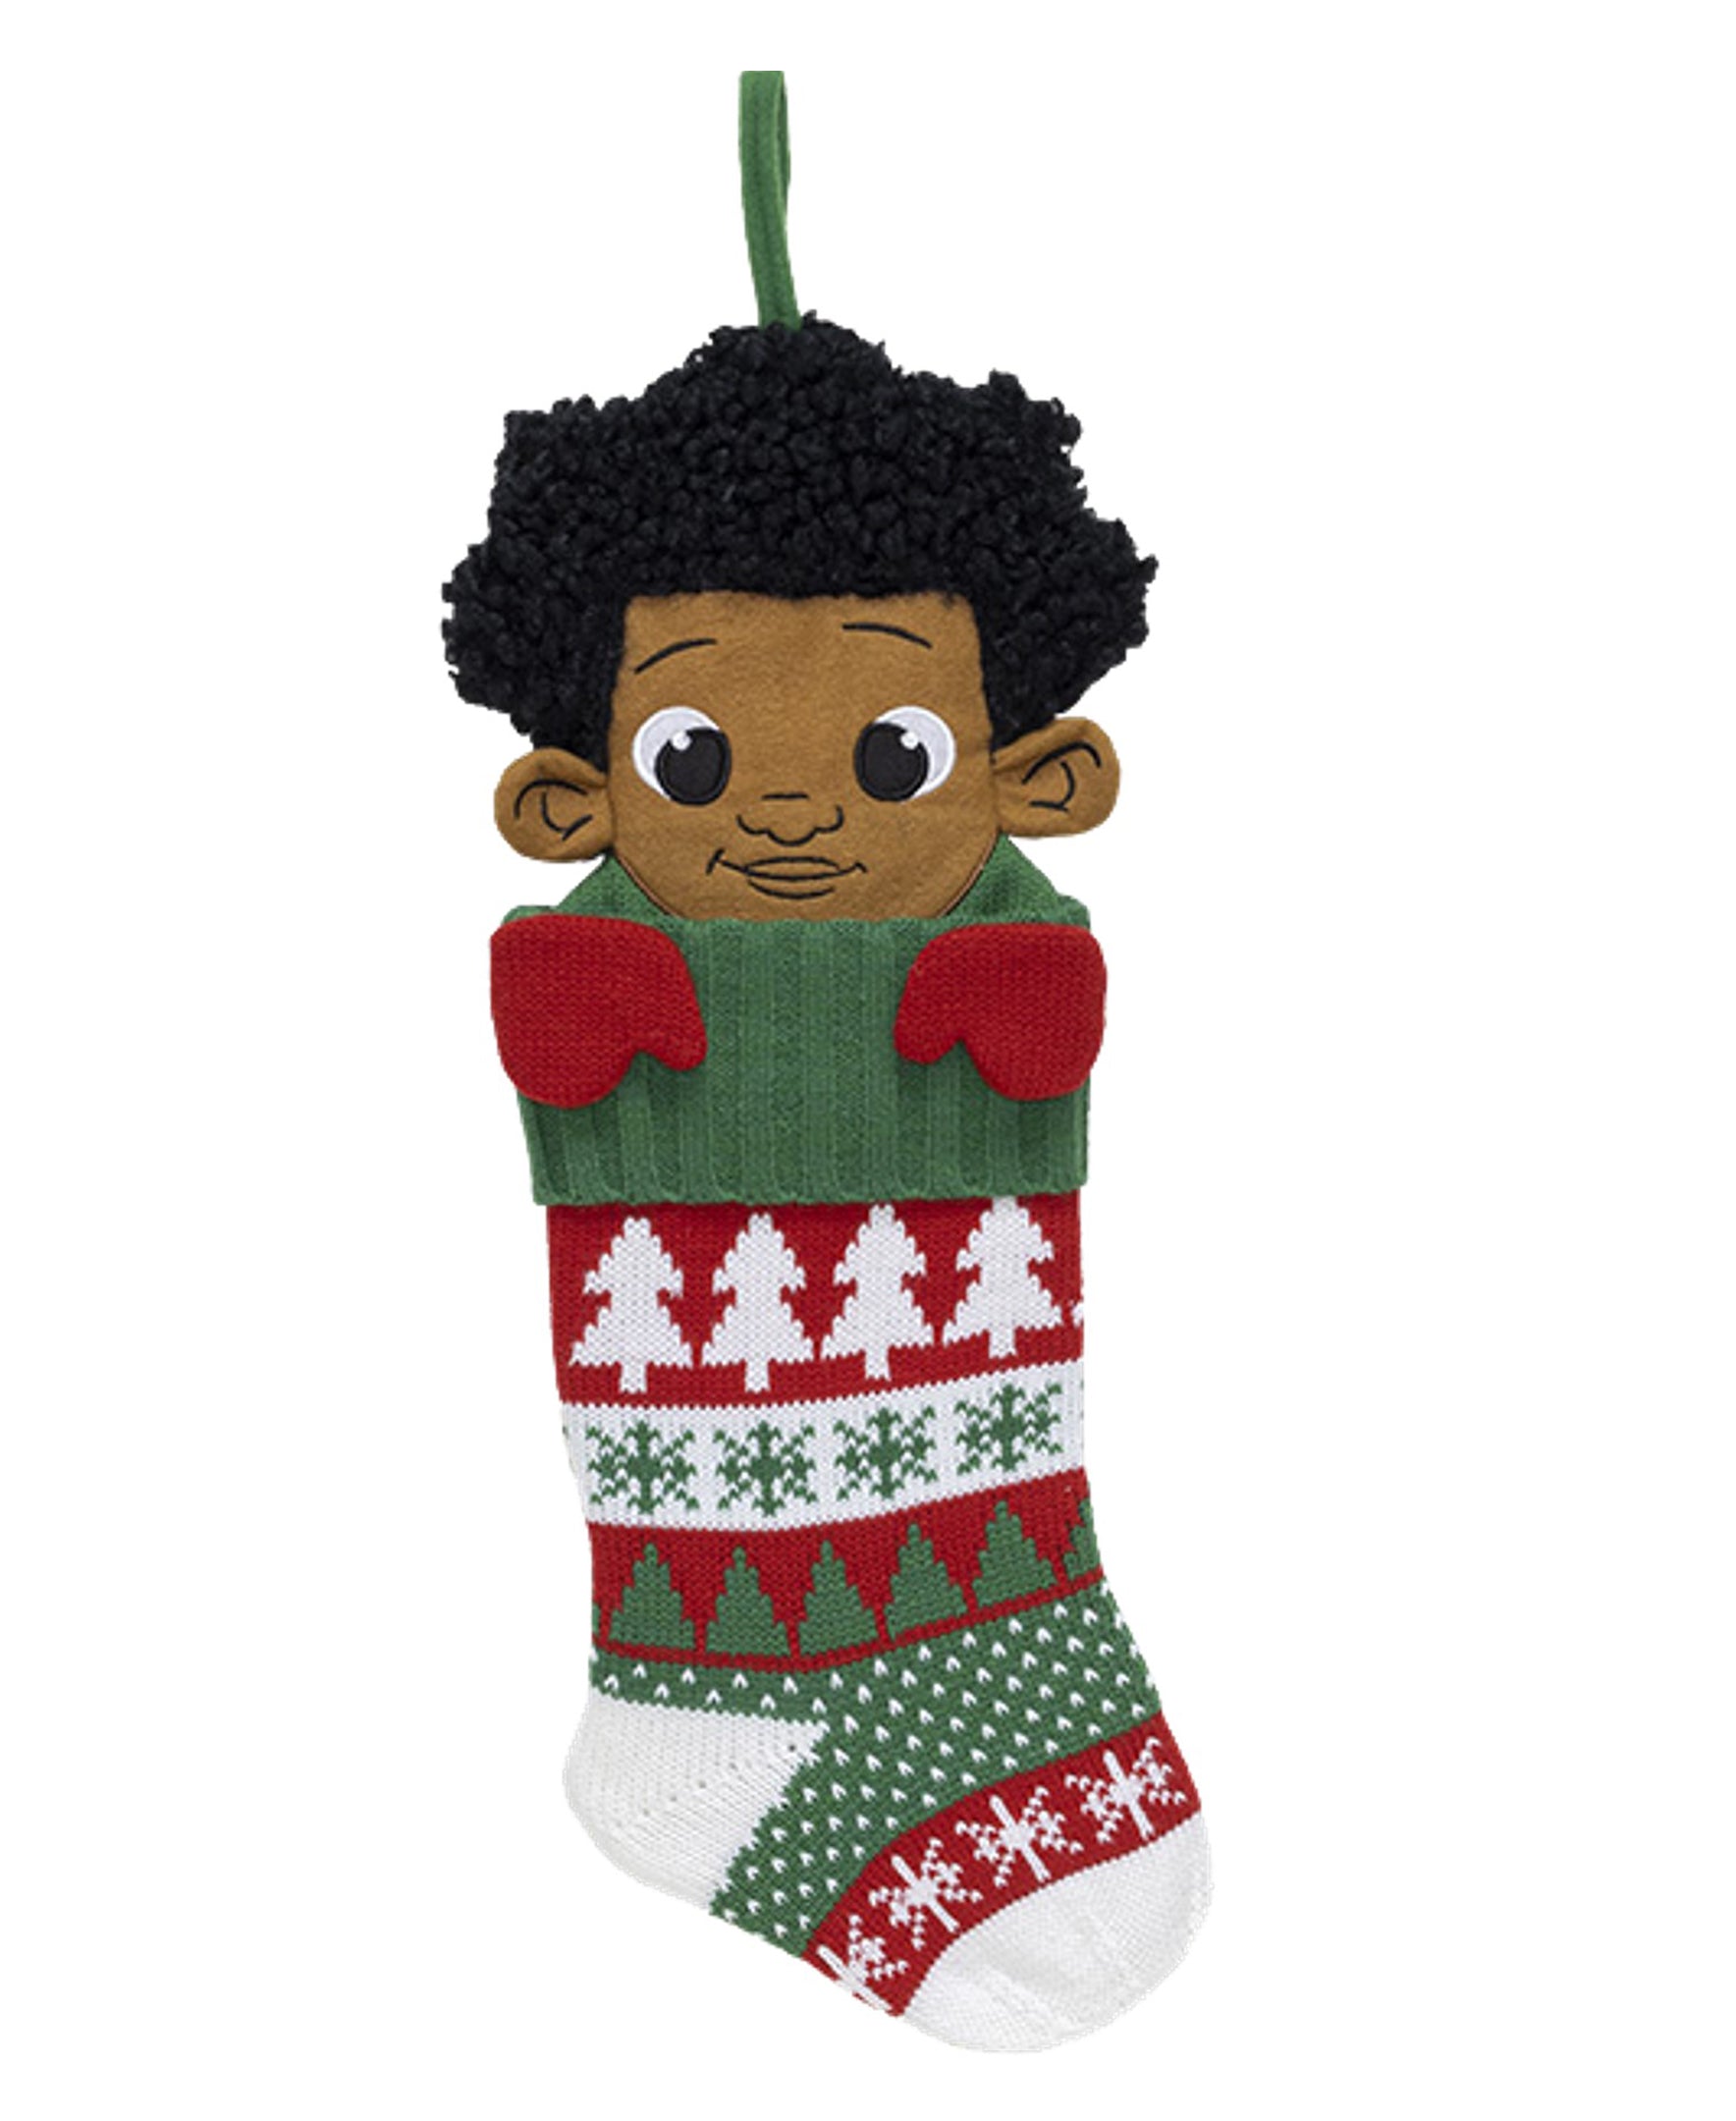 red, green and white Christmas themed matel stocking with a young black boy's face poking out. He has afro hair